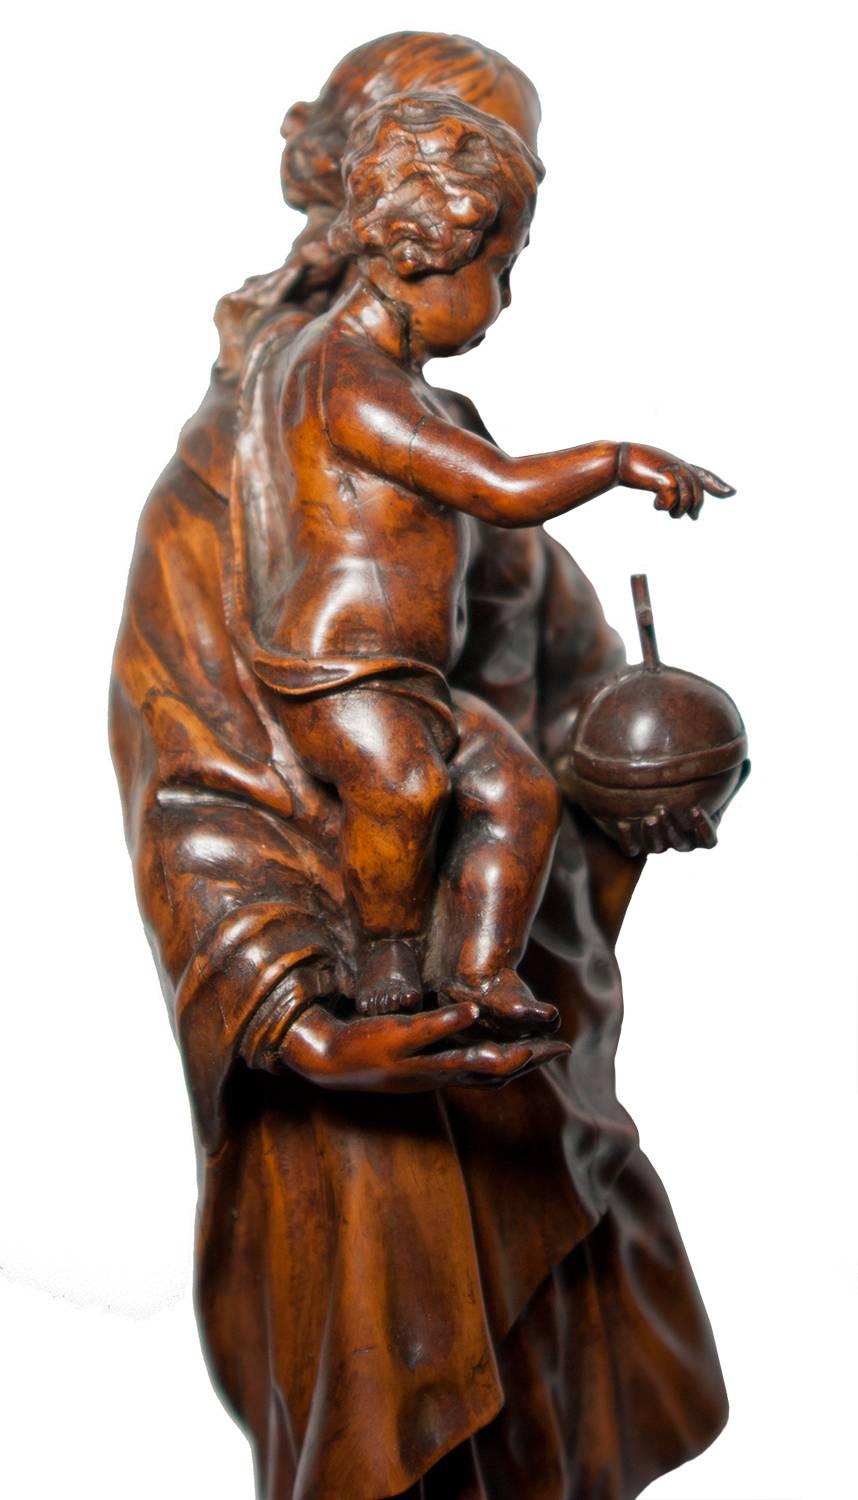 Flemish Virgin and Child Figure, circa 1700 - Brown Figurative Sculpture by Unknown